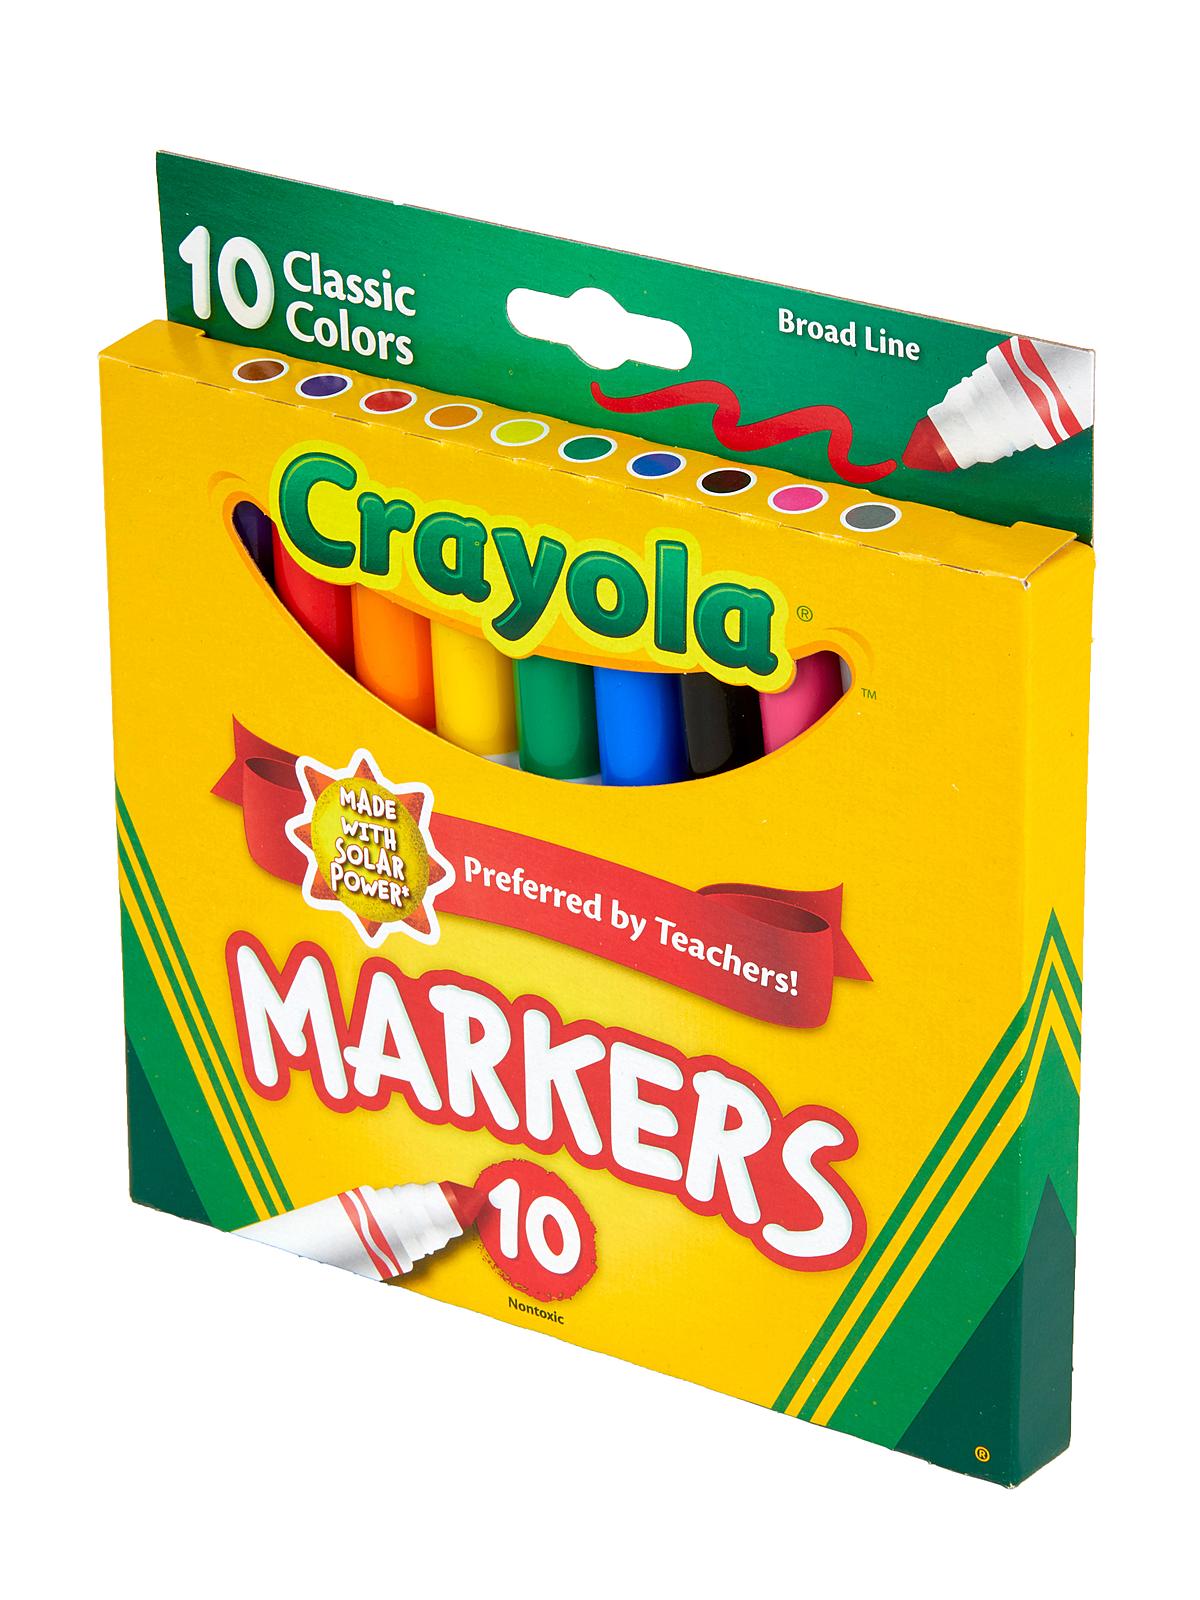 Classic Colors Marker Sets Broad Box Of 10